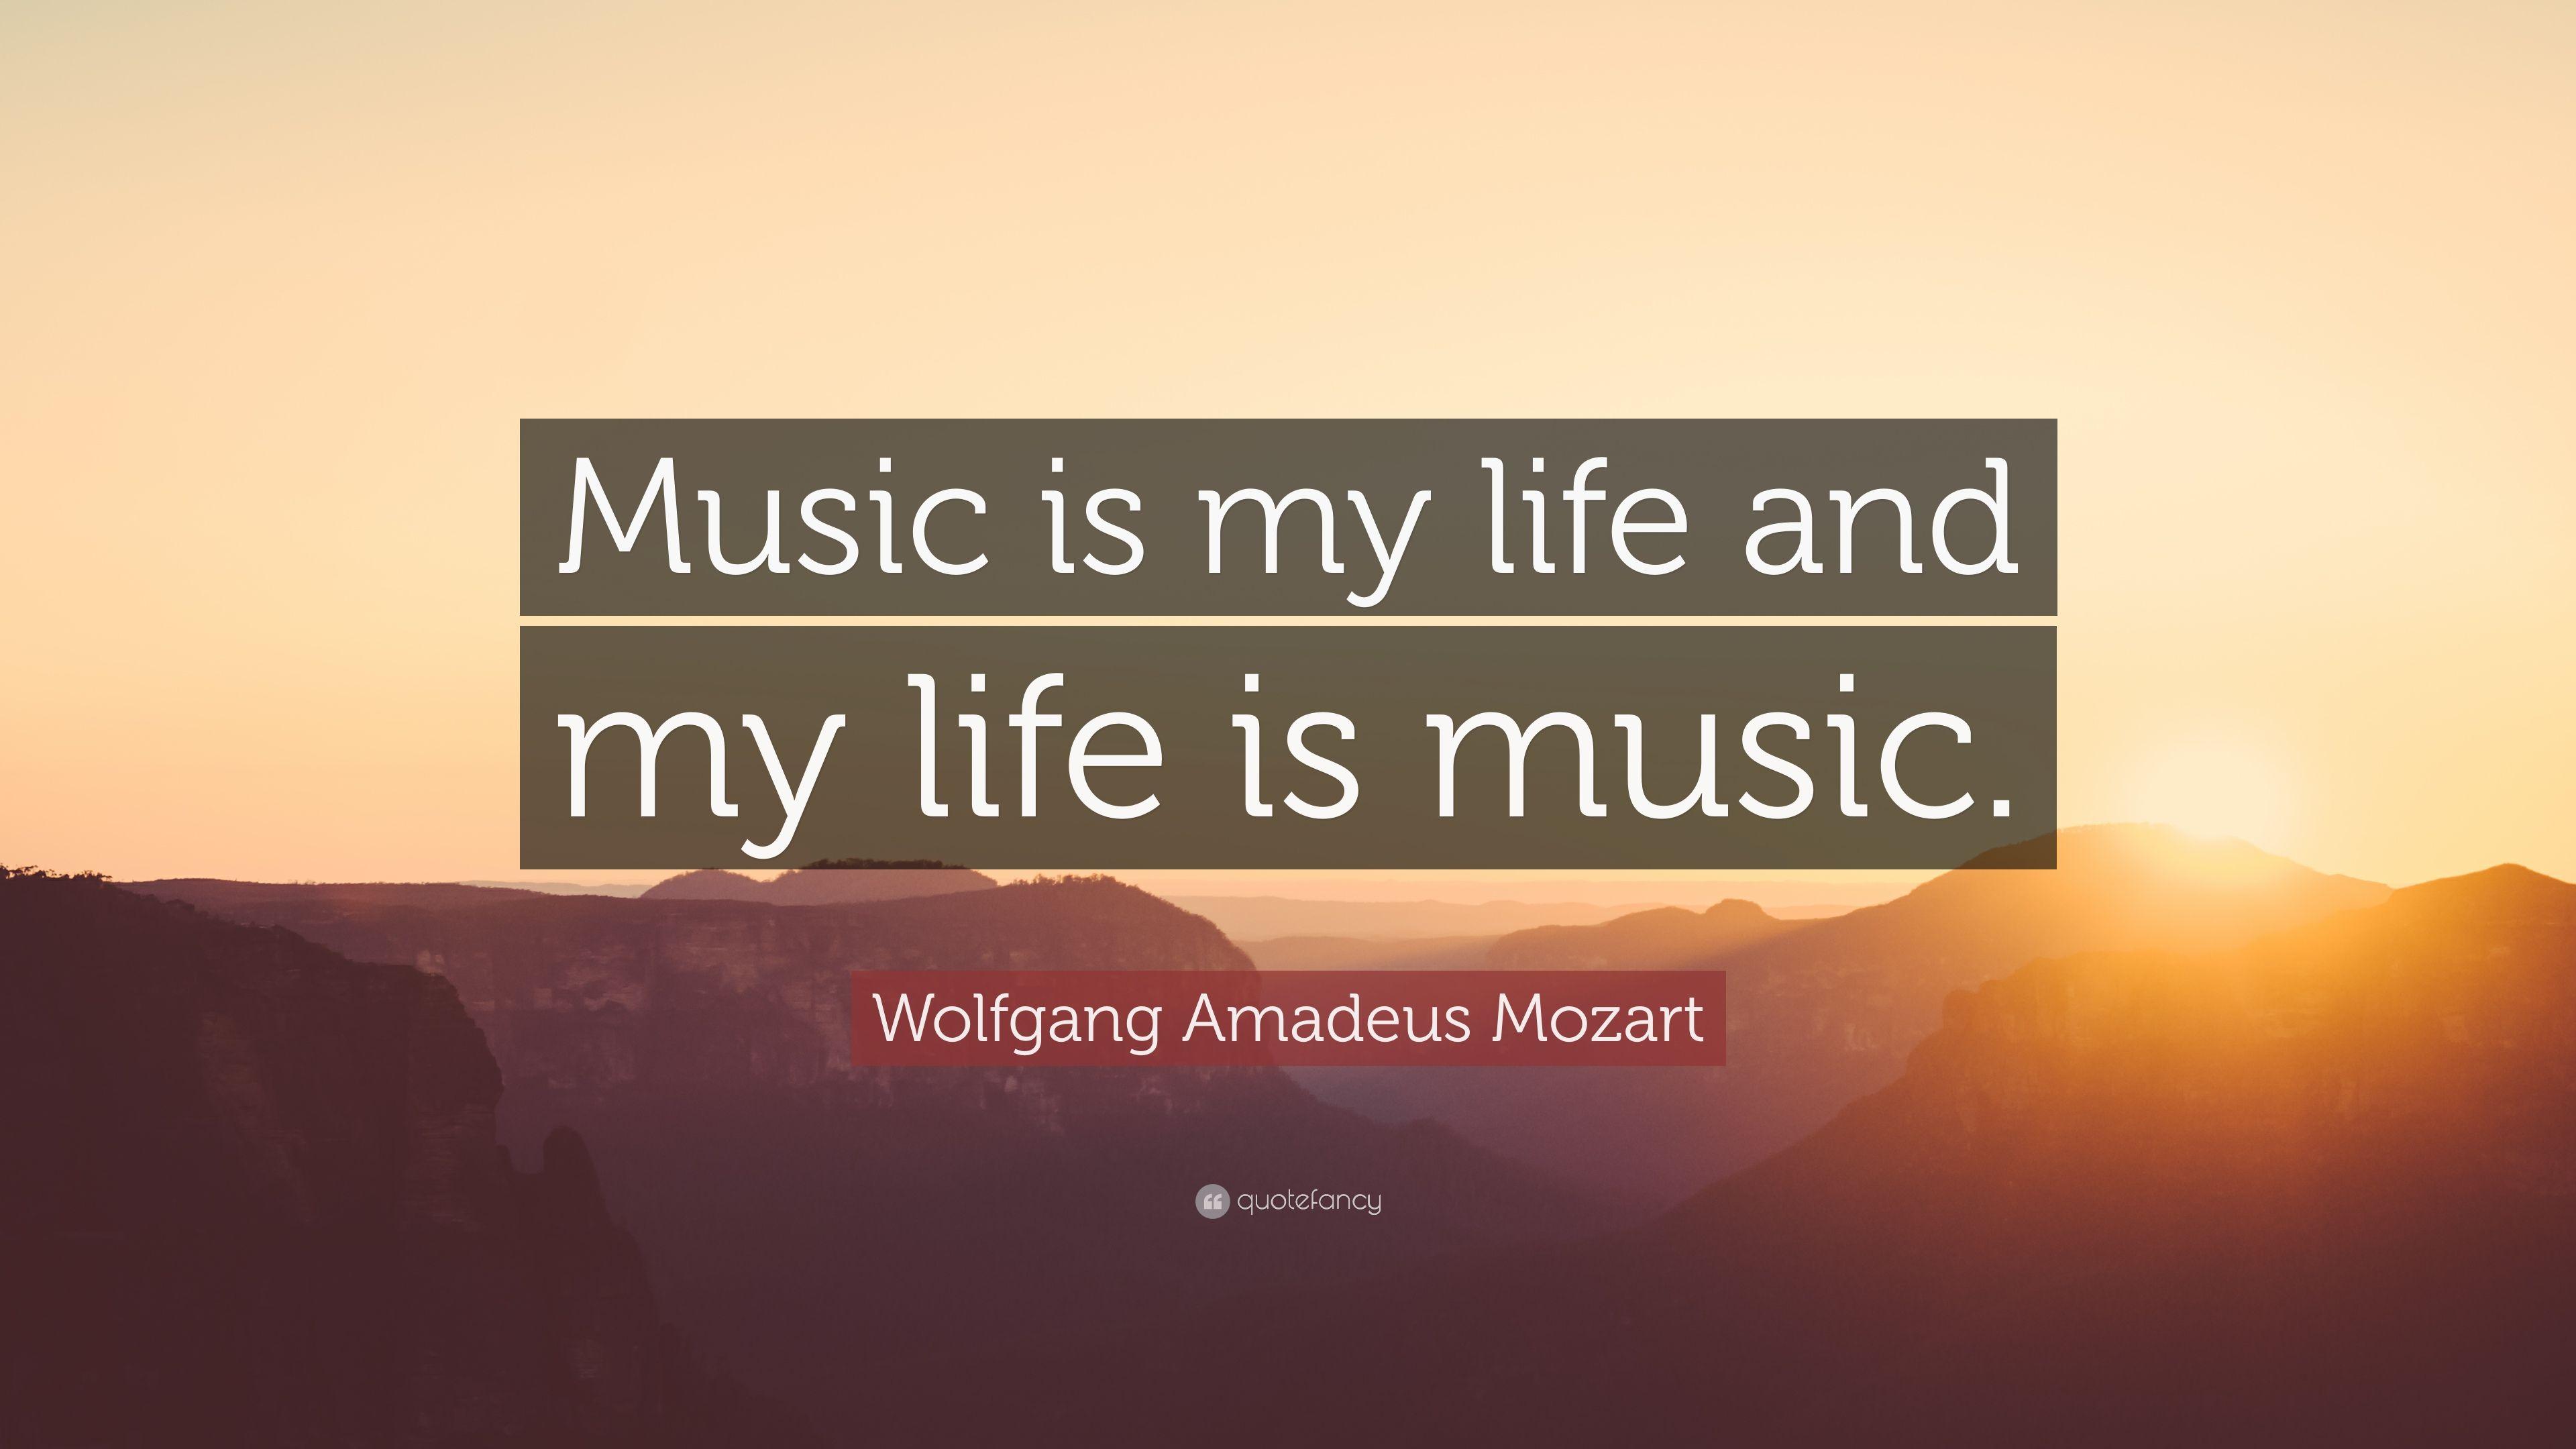 Wolfgang Amadeus Mozart Quote: “Music is my life and my life